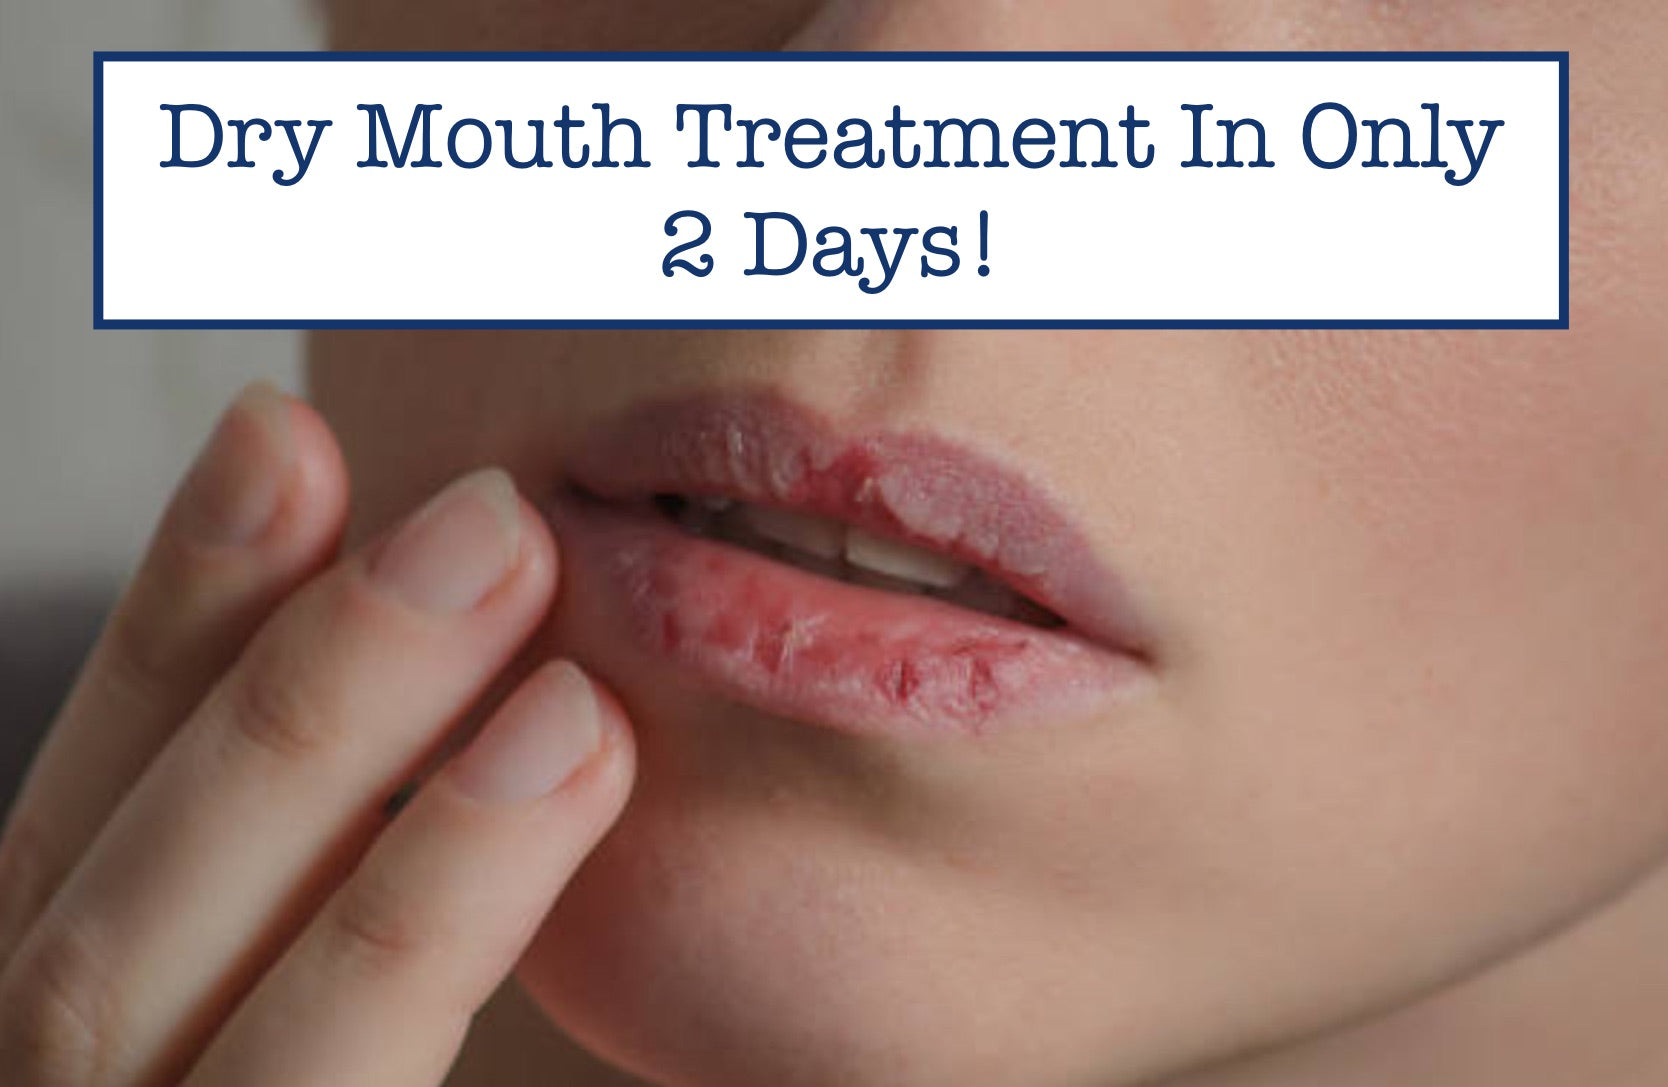 Dry Mouth Treatment In Only 2 Days!